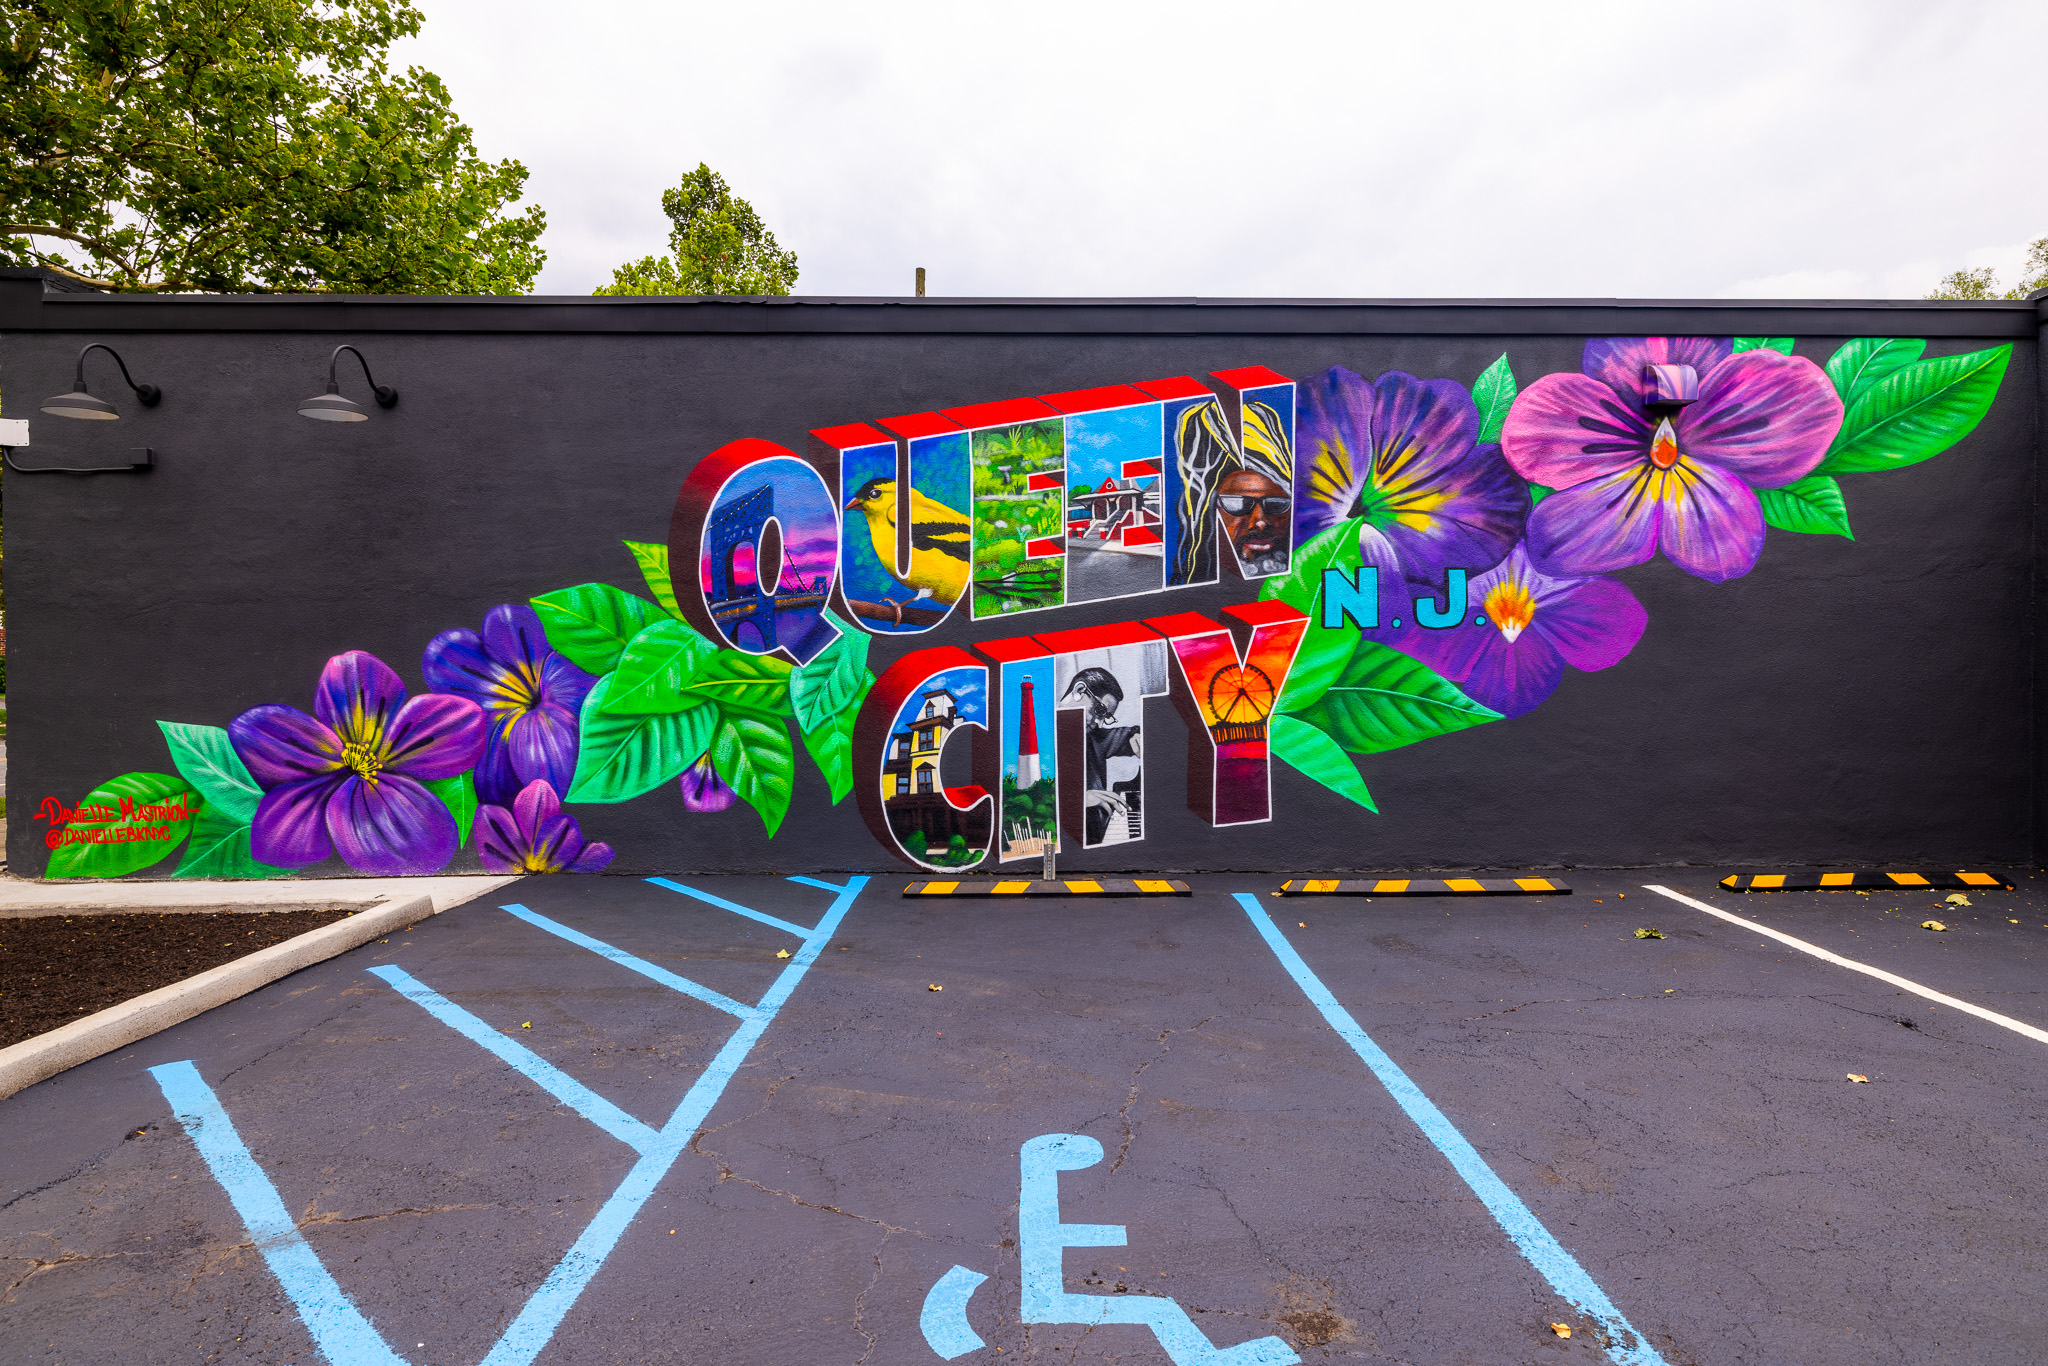 The Queen City mural painted by artist Danielle Mastrion appears on a black background. Queen City is painted in vintage lettering, and each letter features a different attribute connected to Plainfield, Union County, and New Jersey. The mural is surrounded by vibrant green leaves and purple violets.